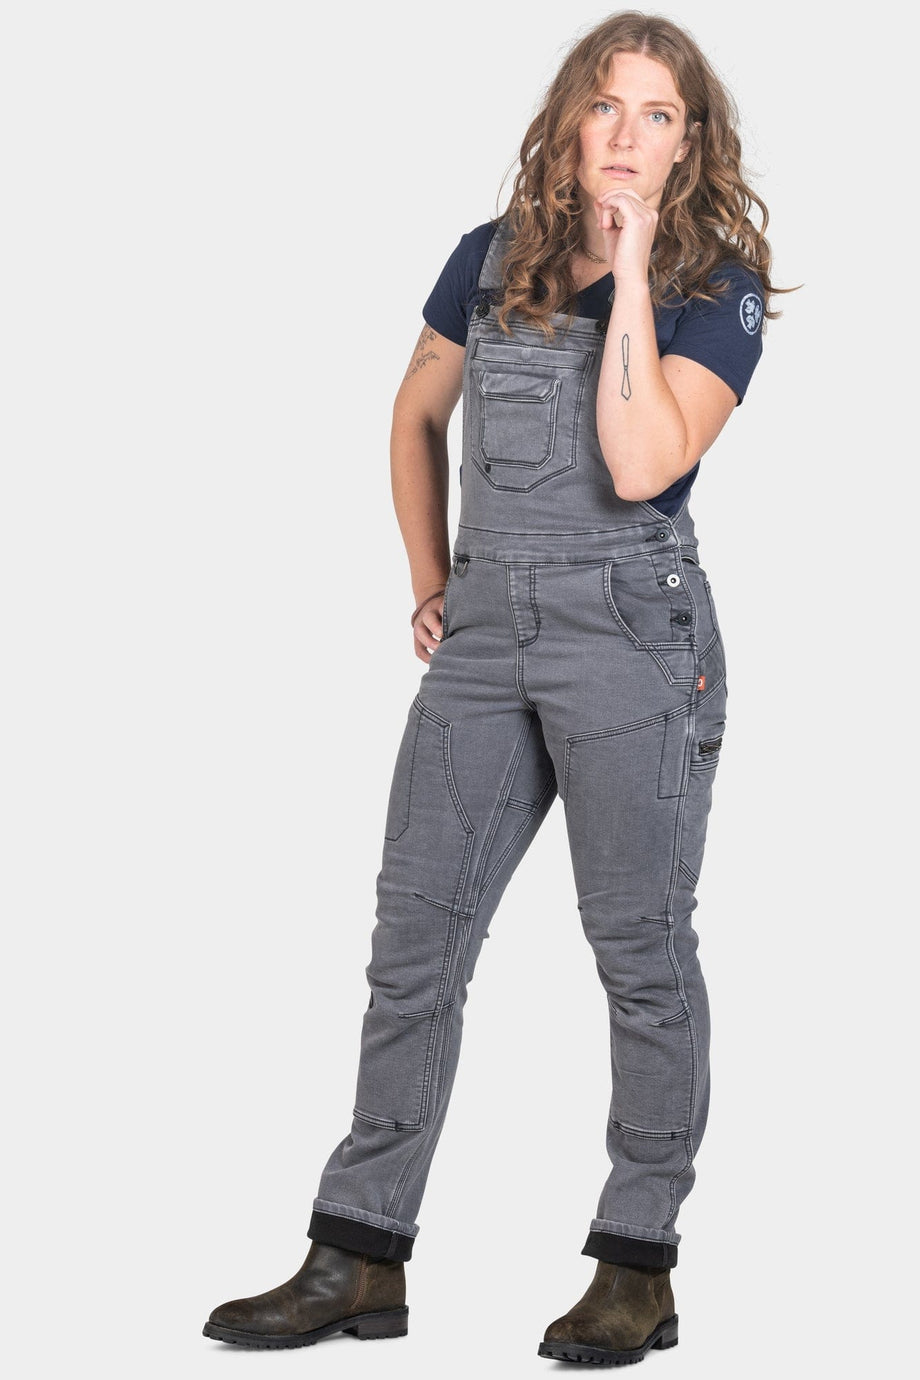 Freshley Drop Seat Overalls in Grey Stretch Thermal Denim – Dovetail ...